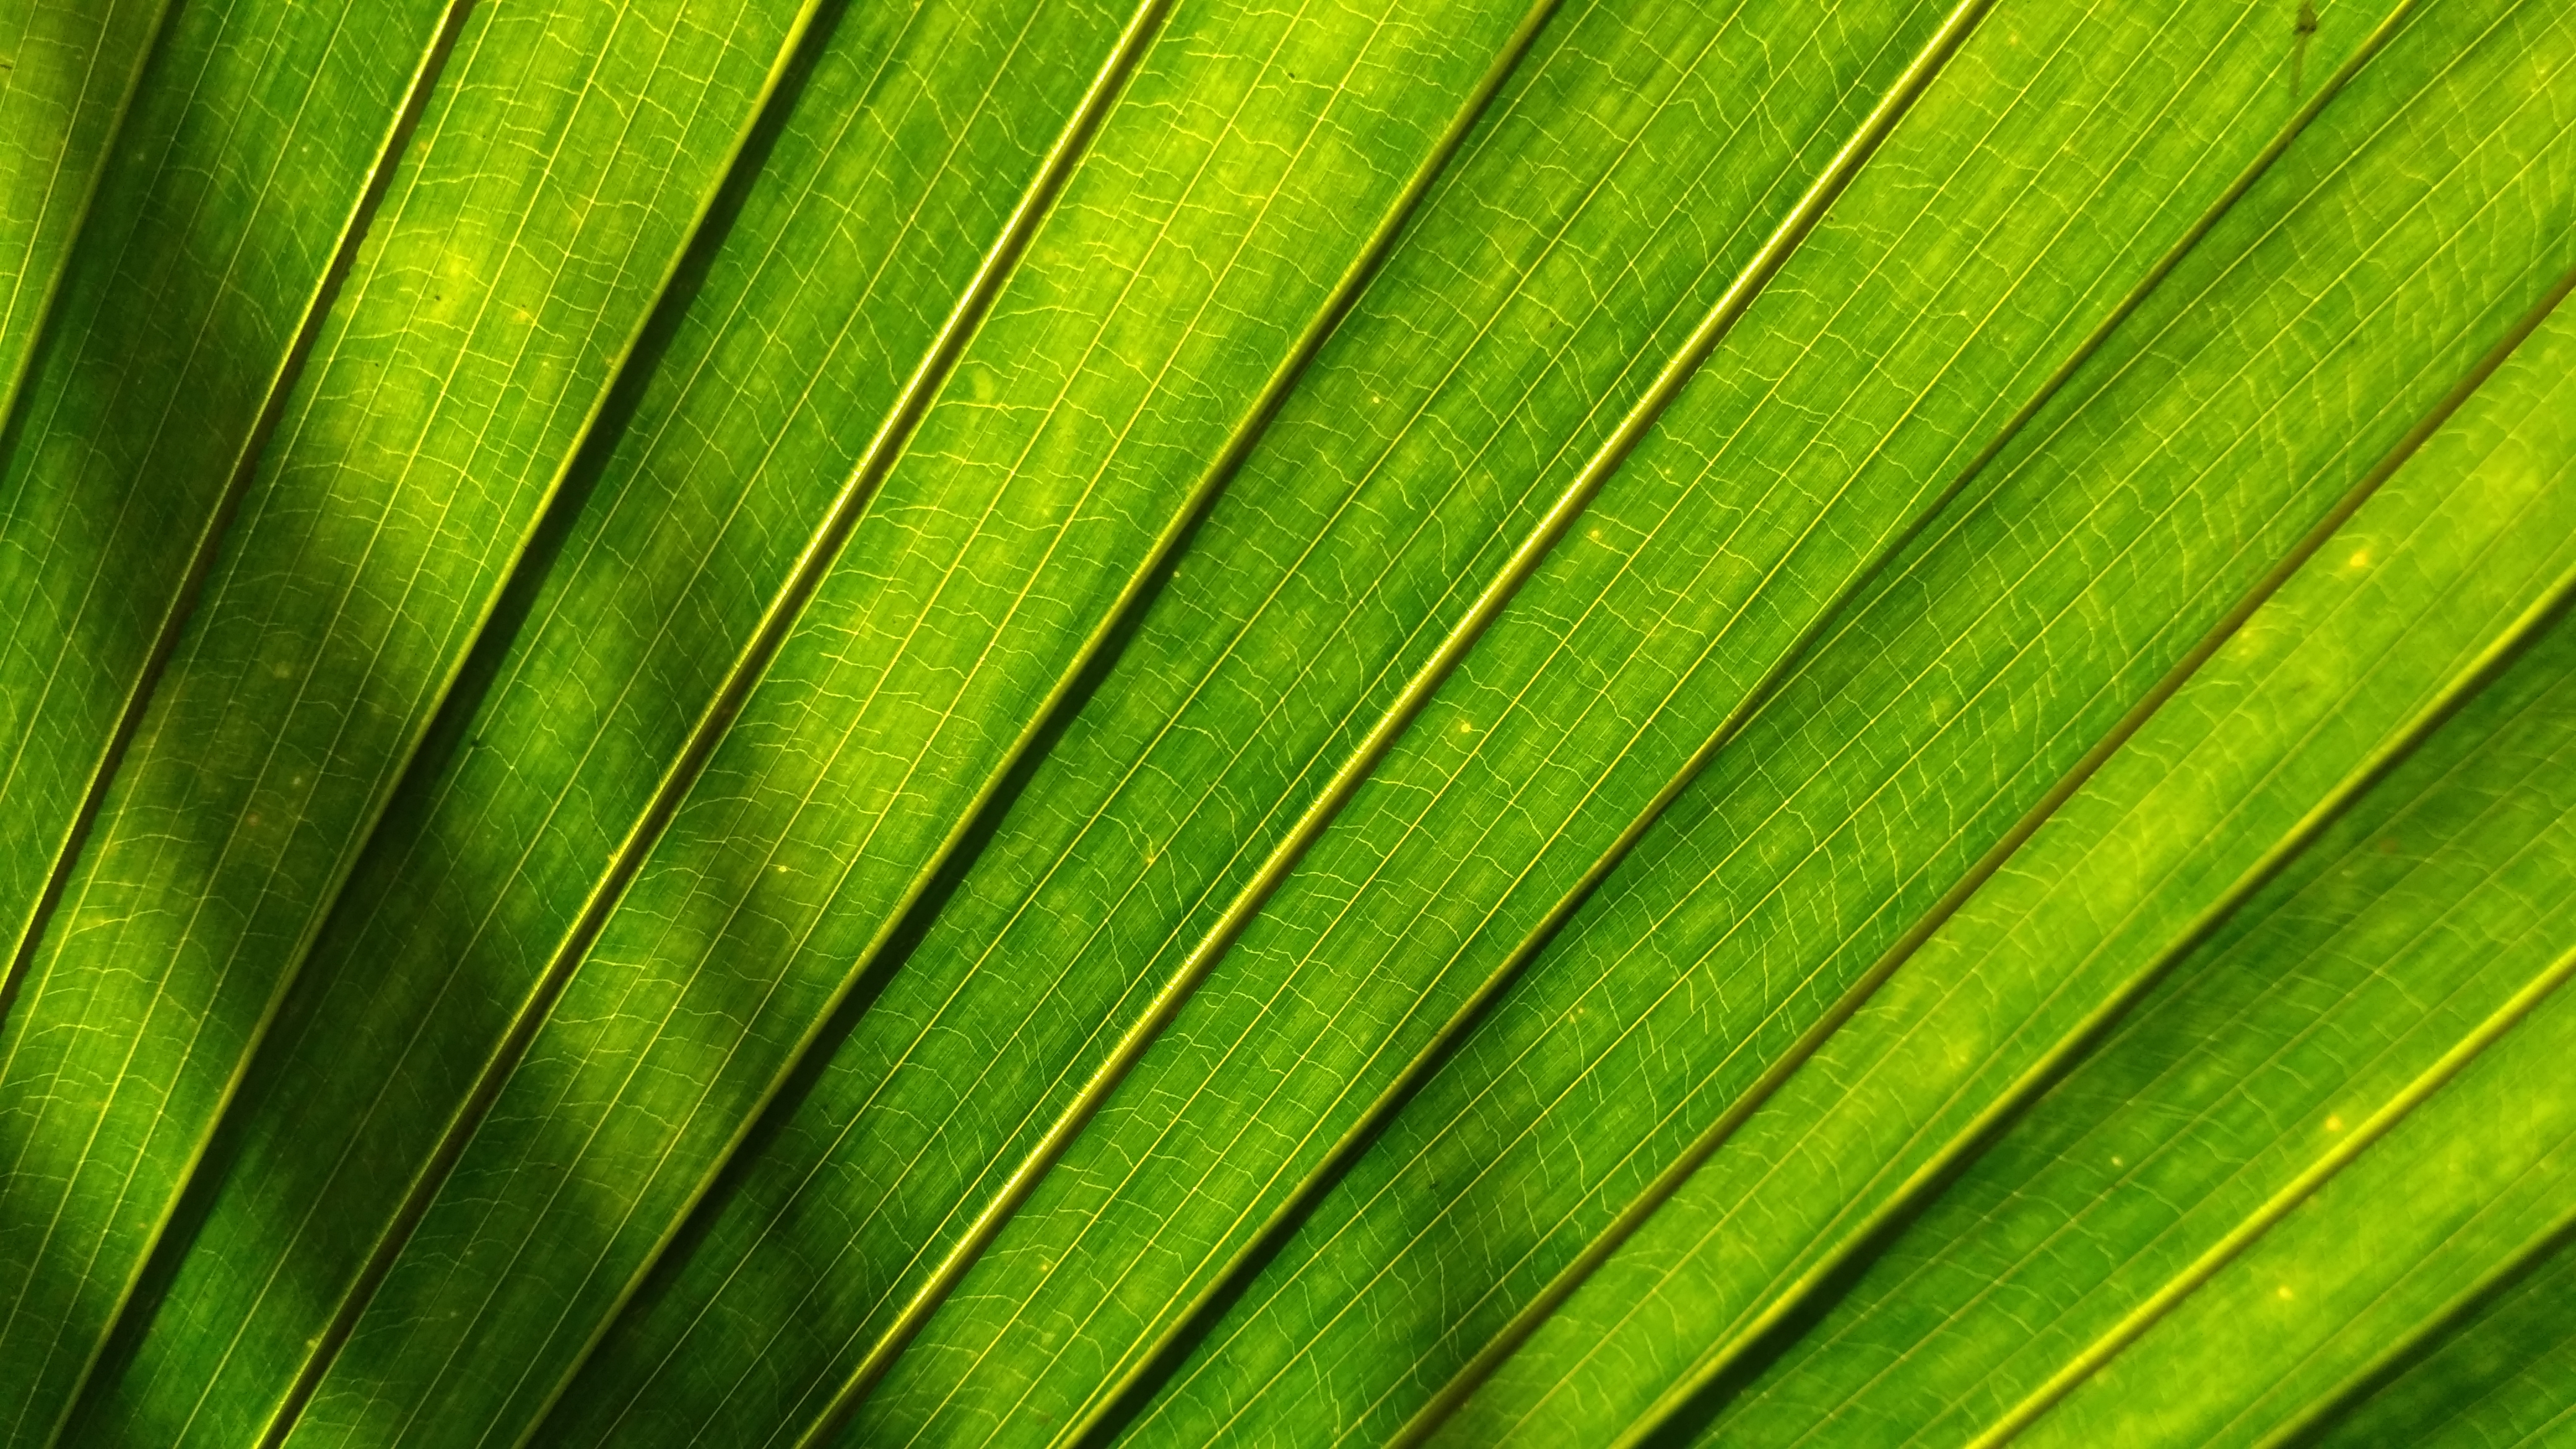 Wallpaper with green leaves